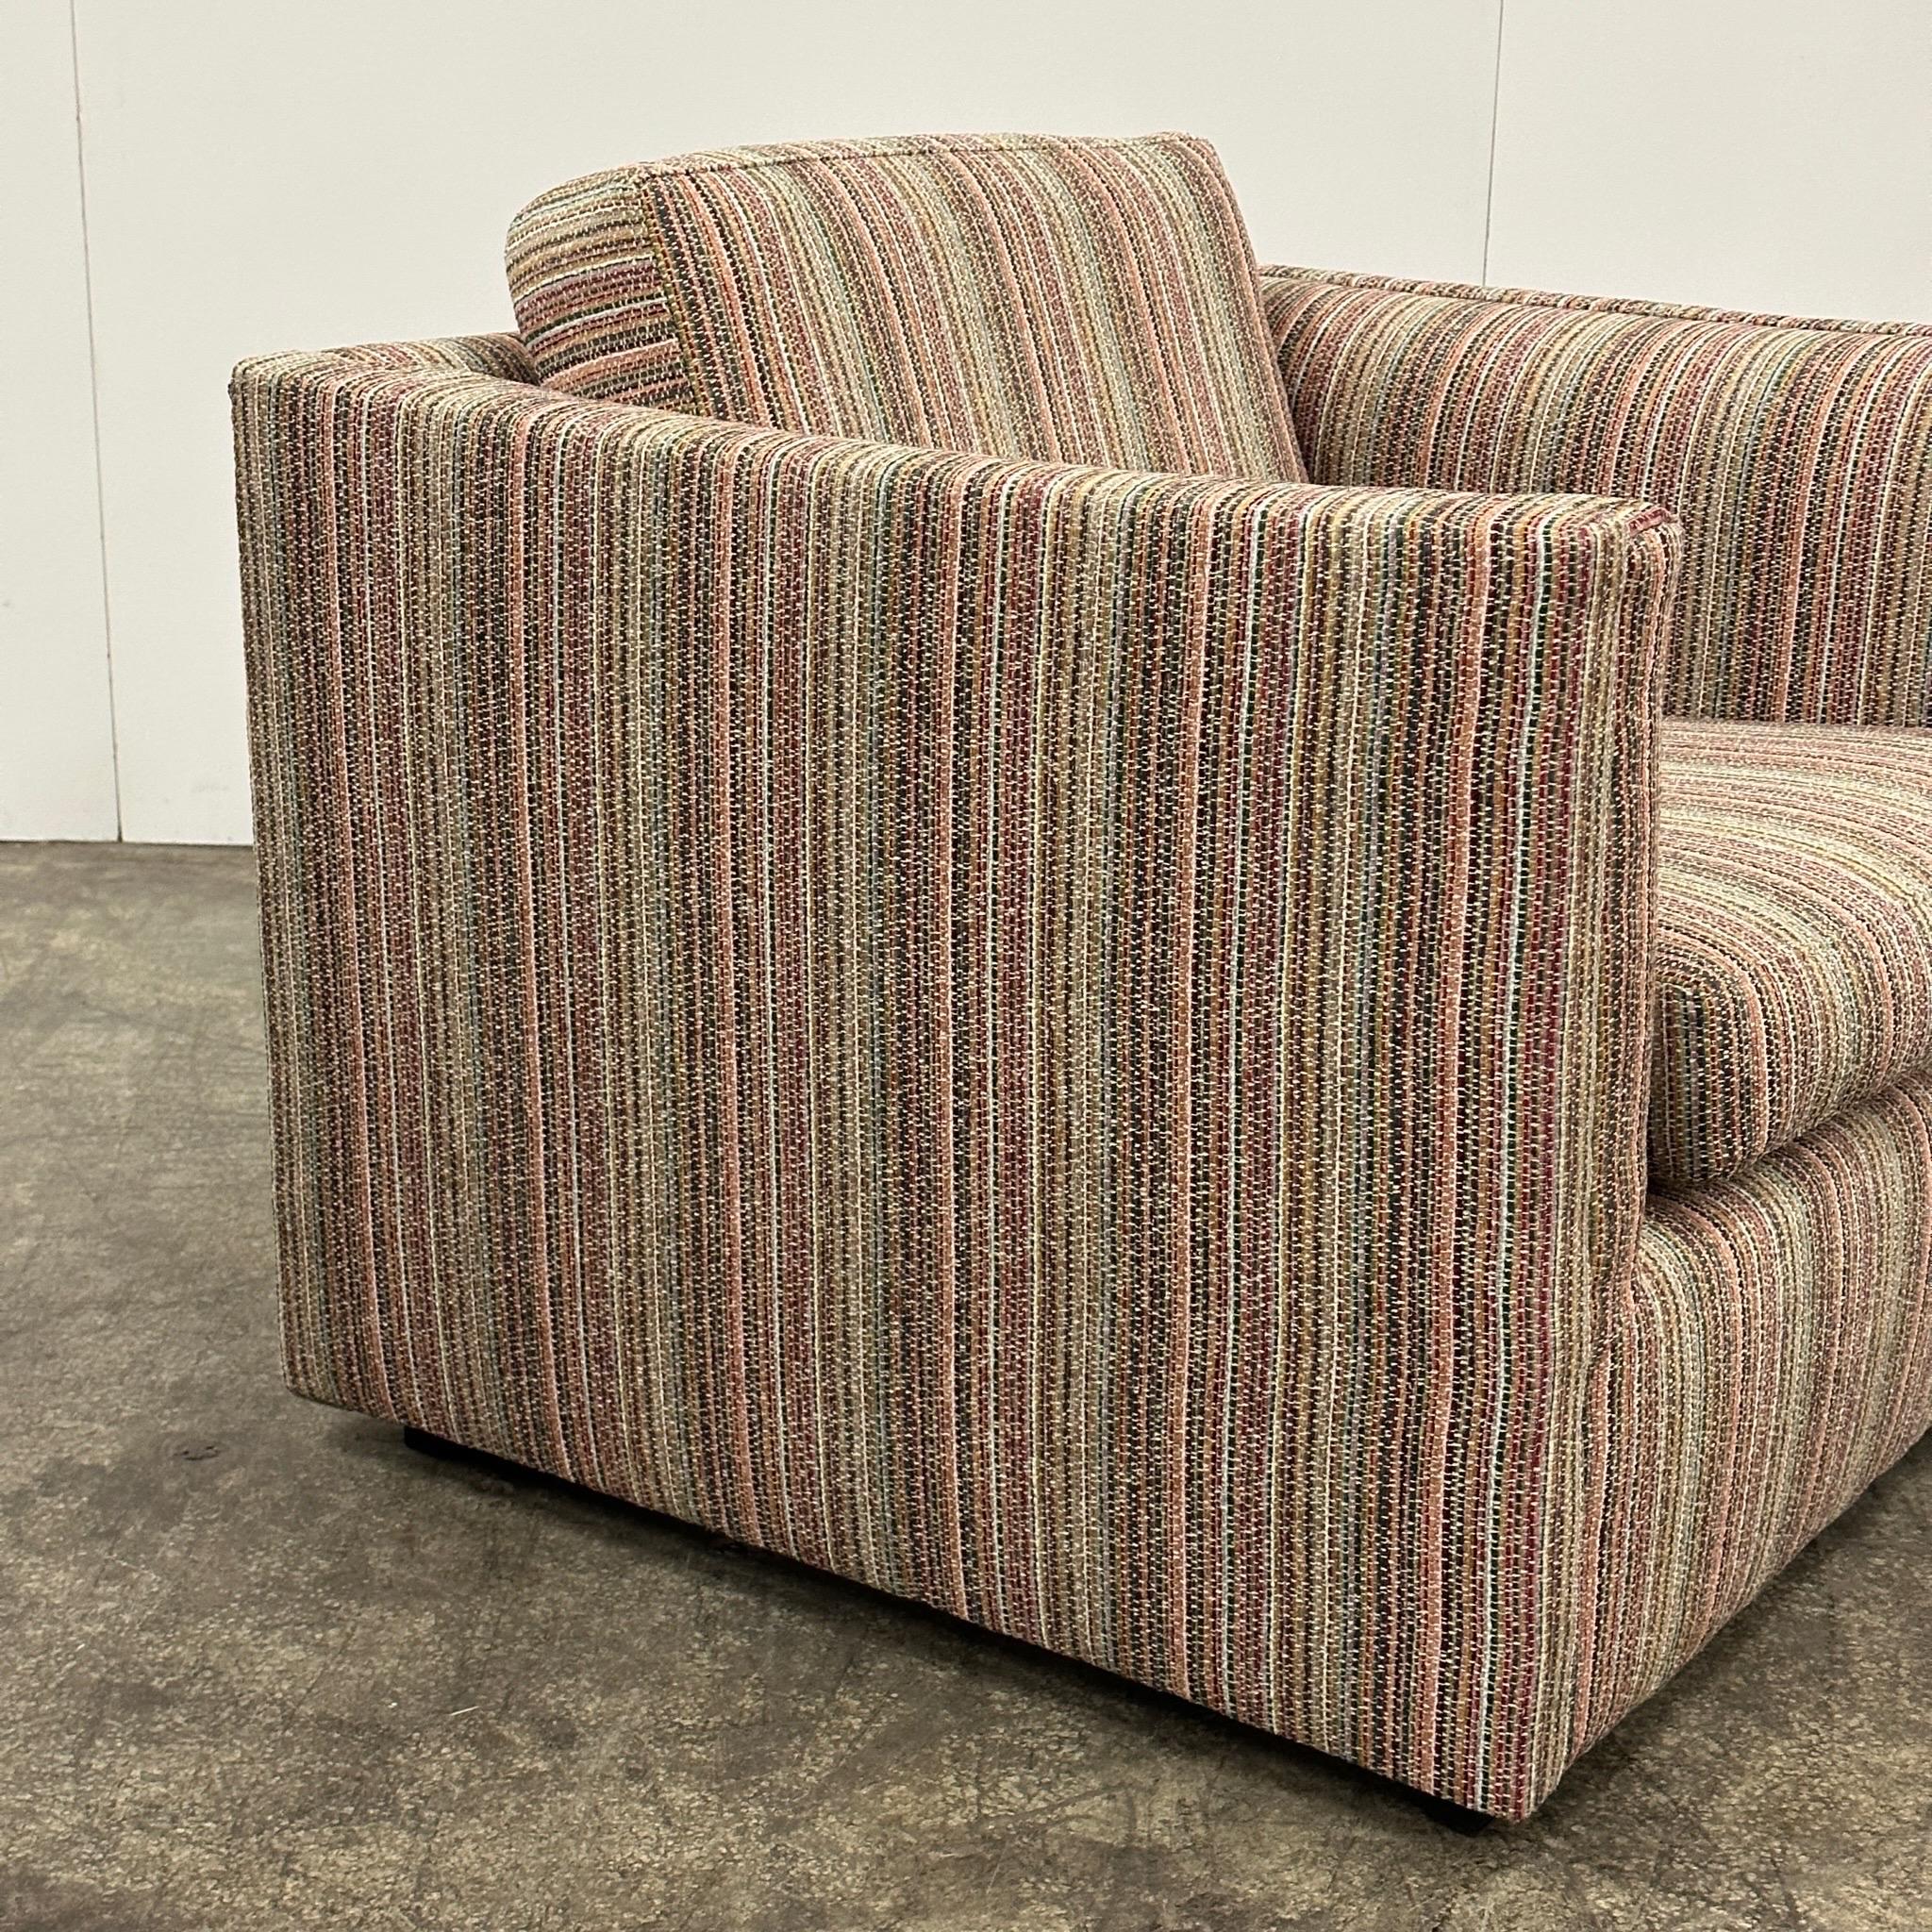 c. 1970s. Price is for the set. Contact us if you’d like to purchase a single item. Reupholstered in a woven fabric reminiscent of Missoni. Attributed to Milo Baughman.